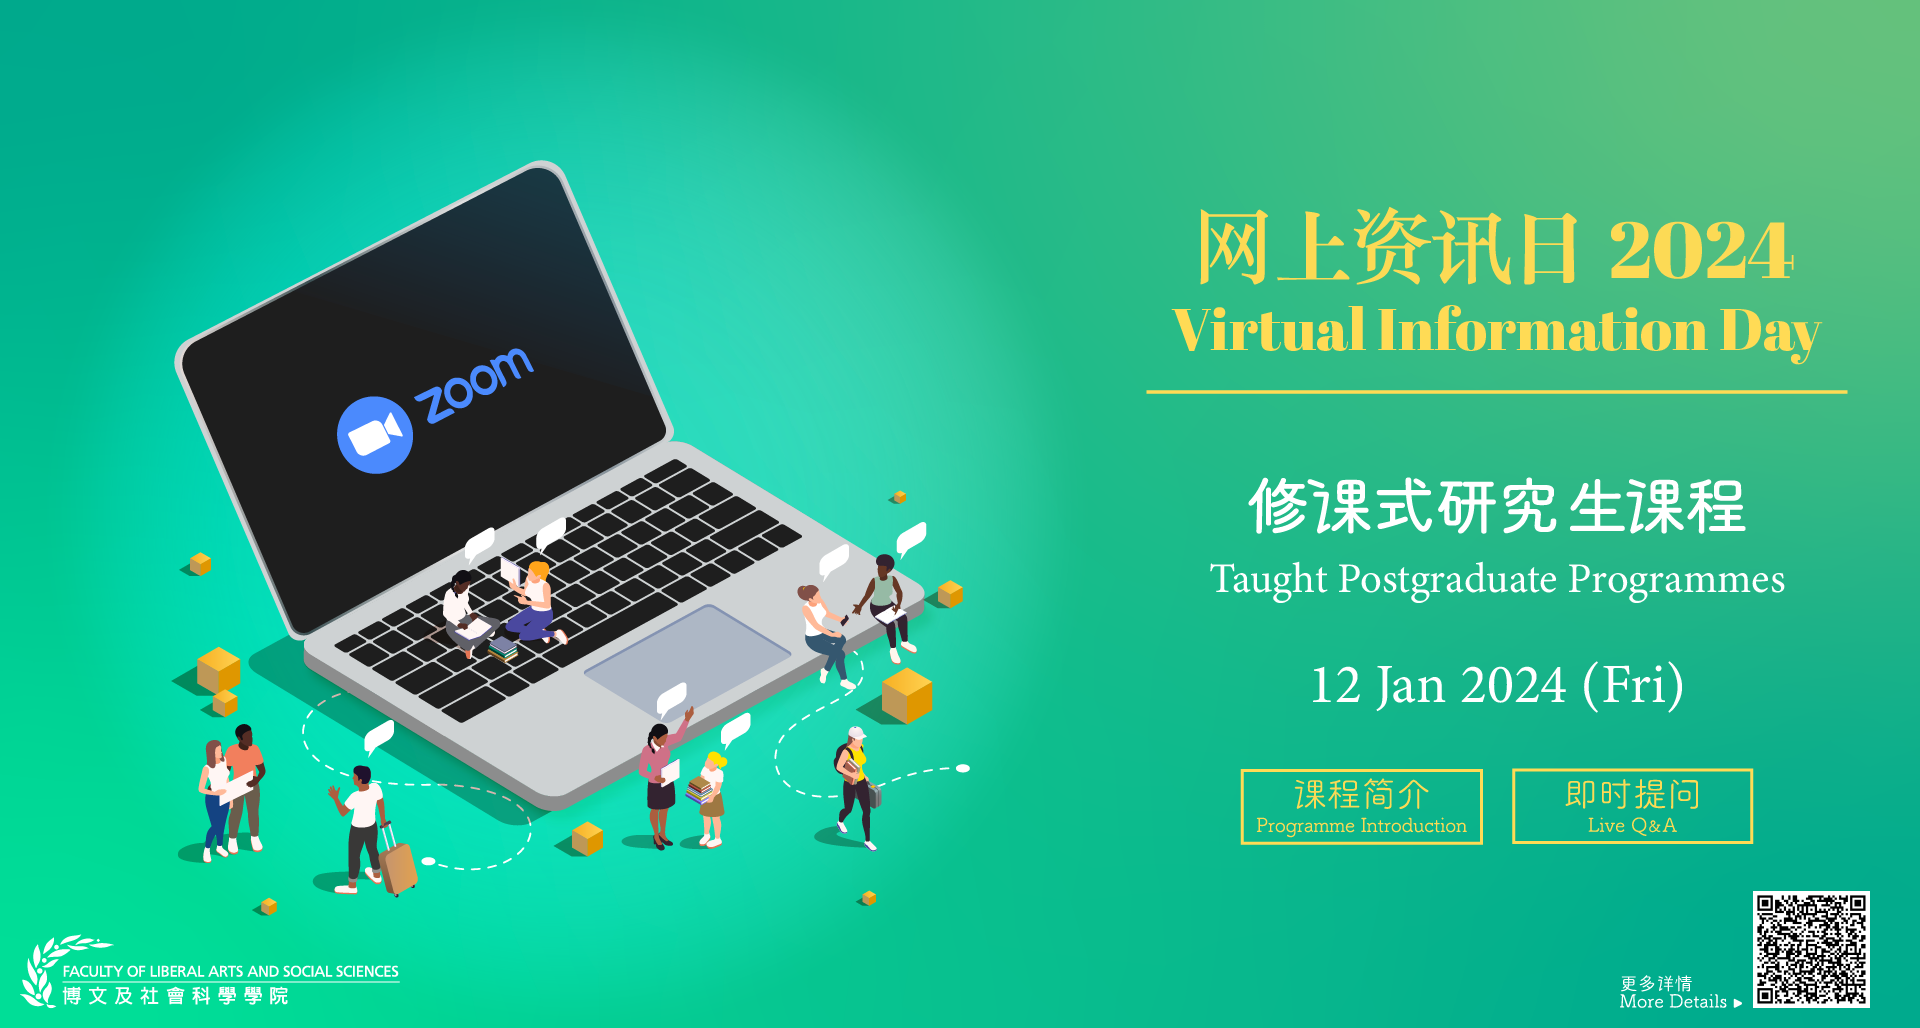 Faculty of Liberal Arts and Social Sciences (FLASS) will host a Virtual Information Day